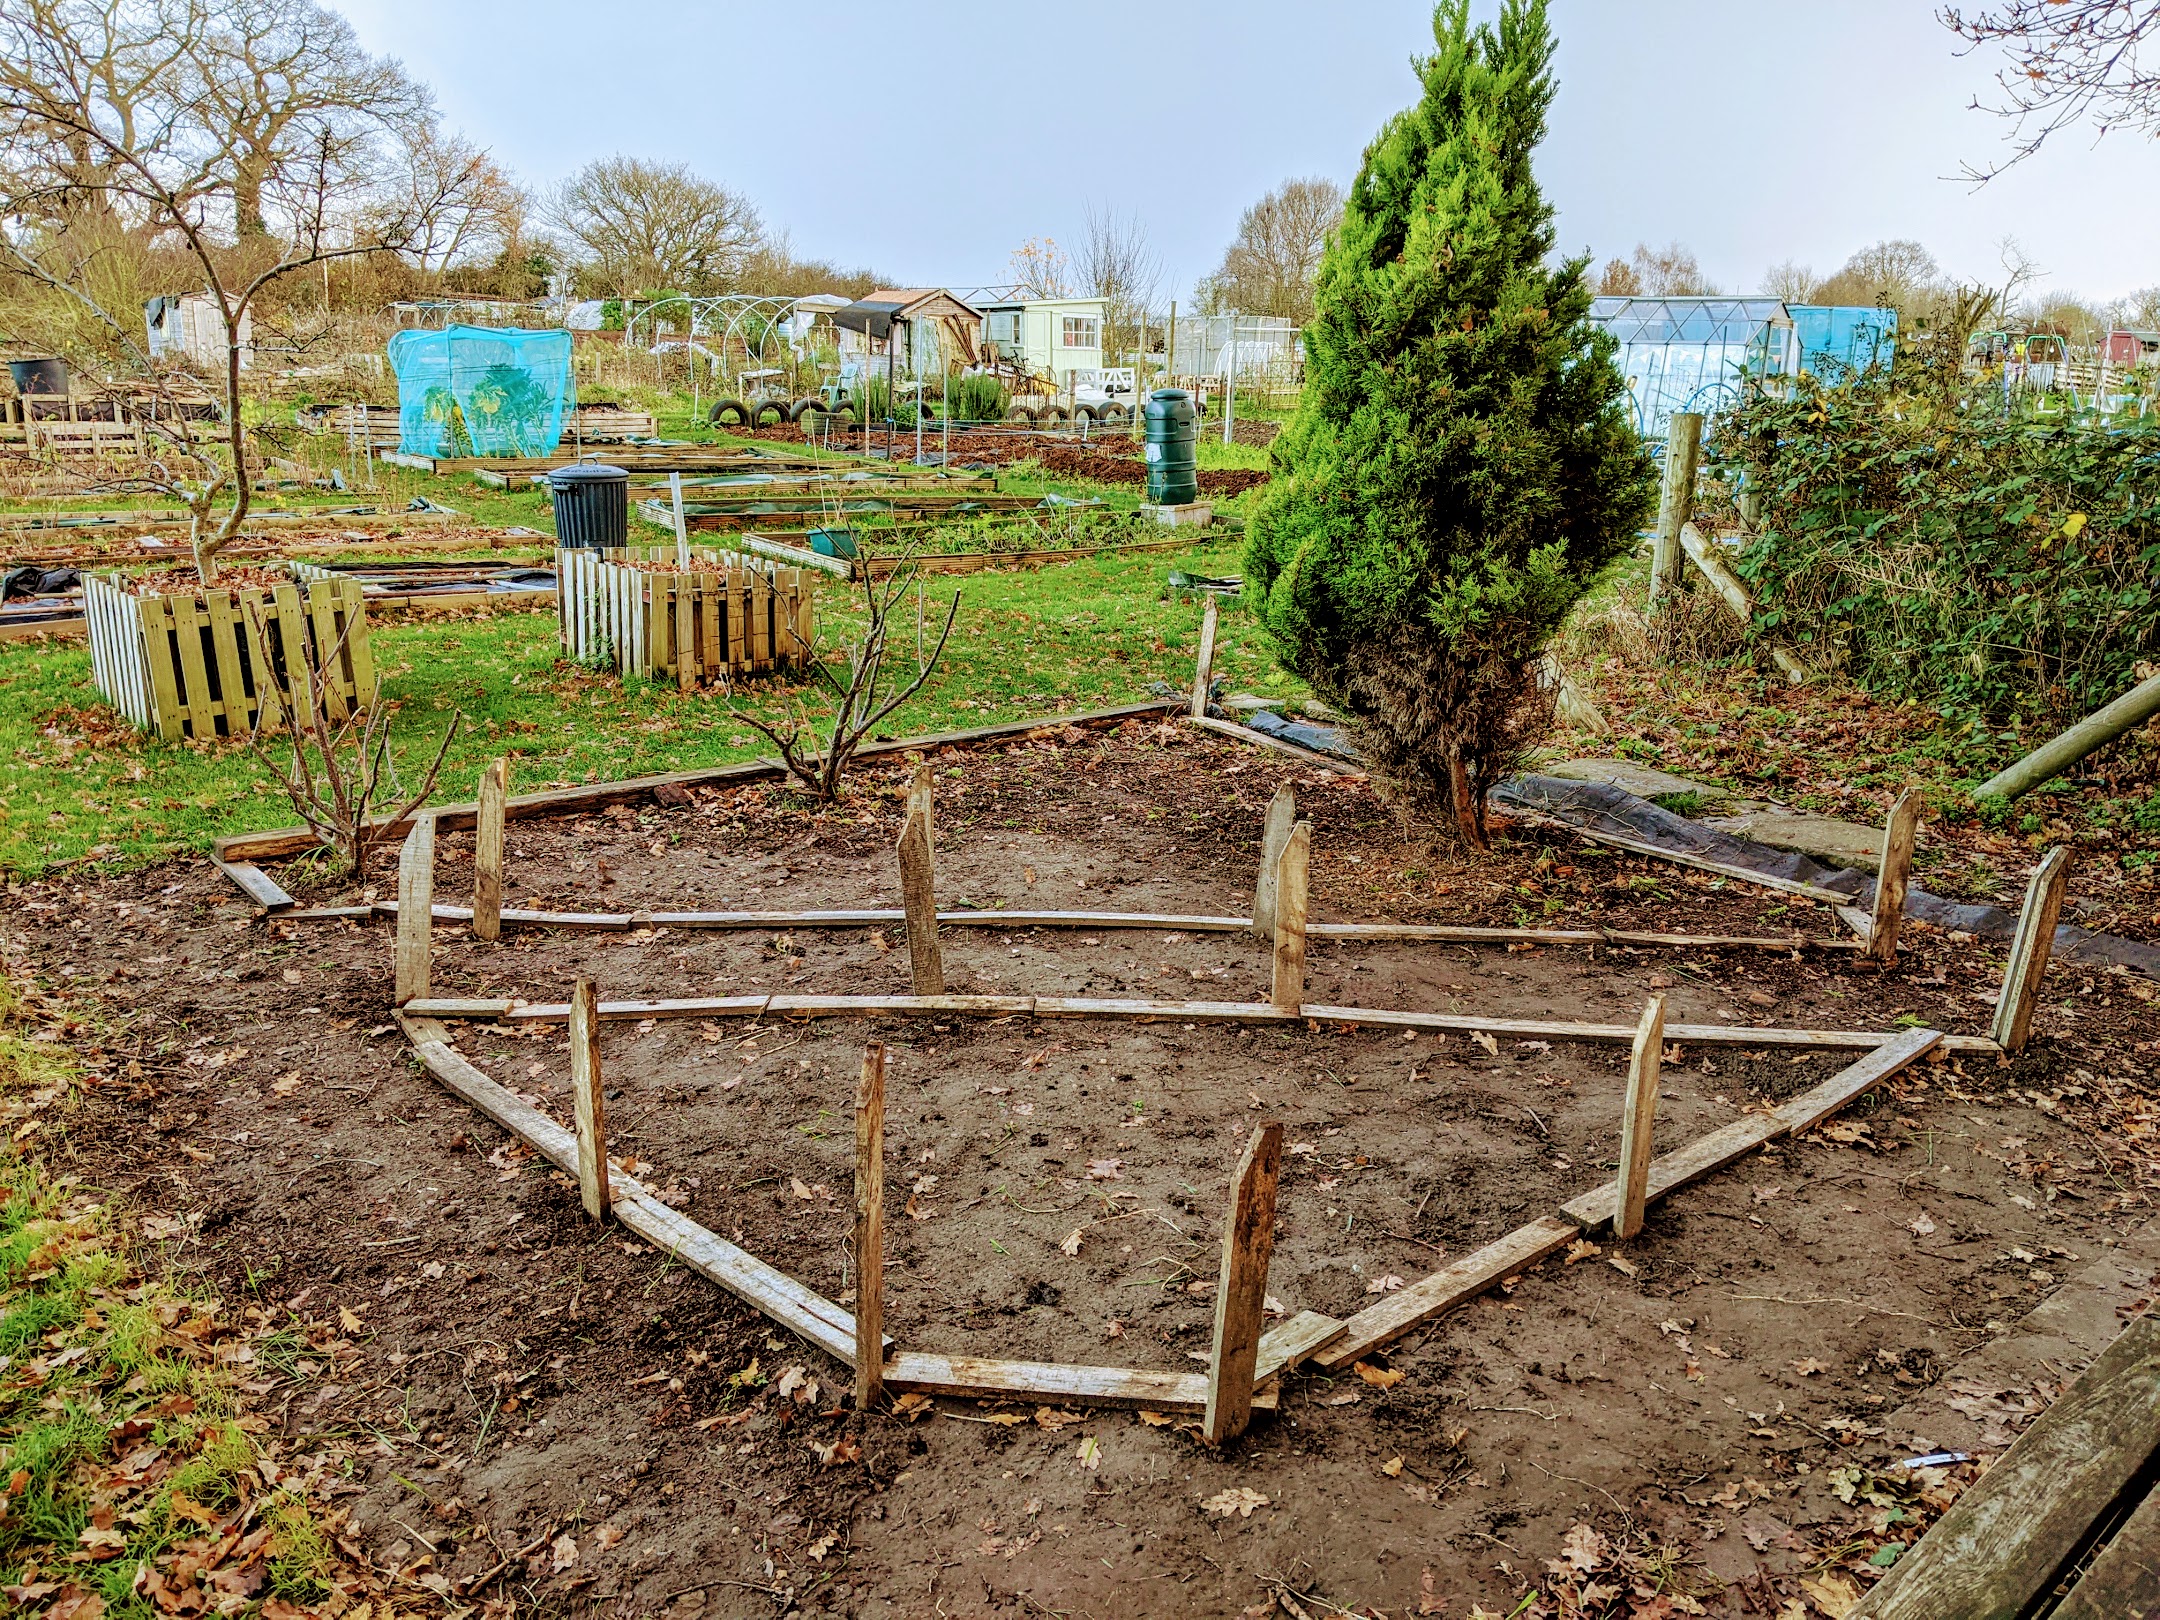 New Allotment Project – a wildlife garden it is!